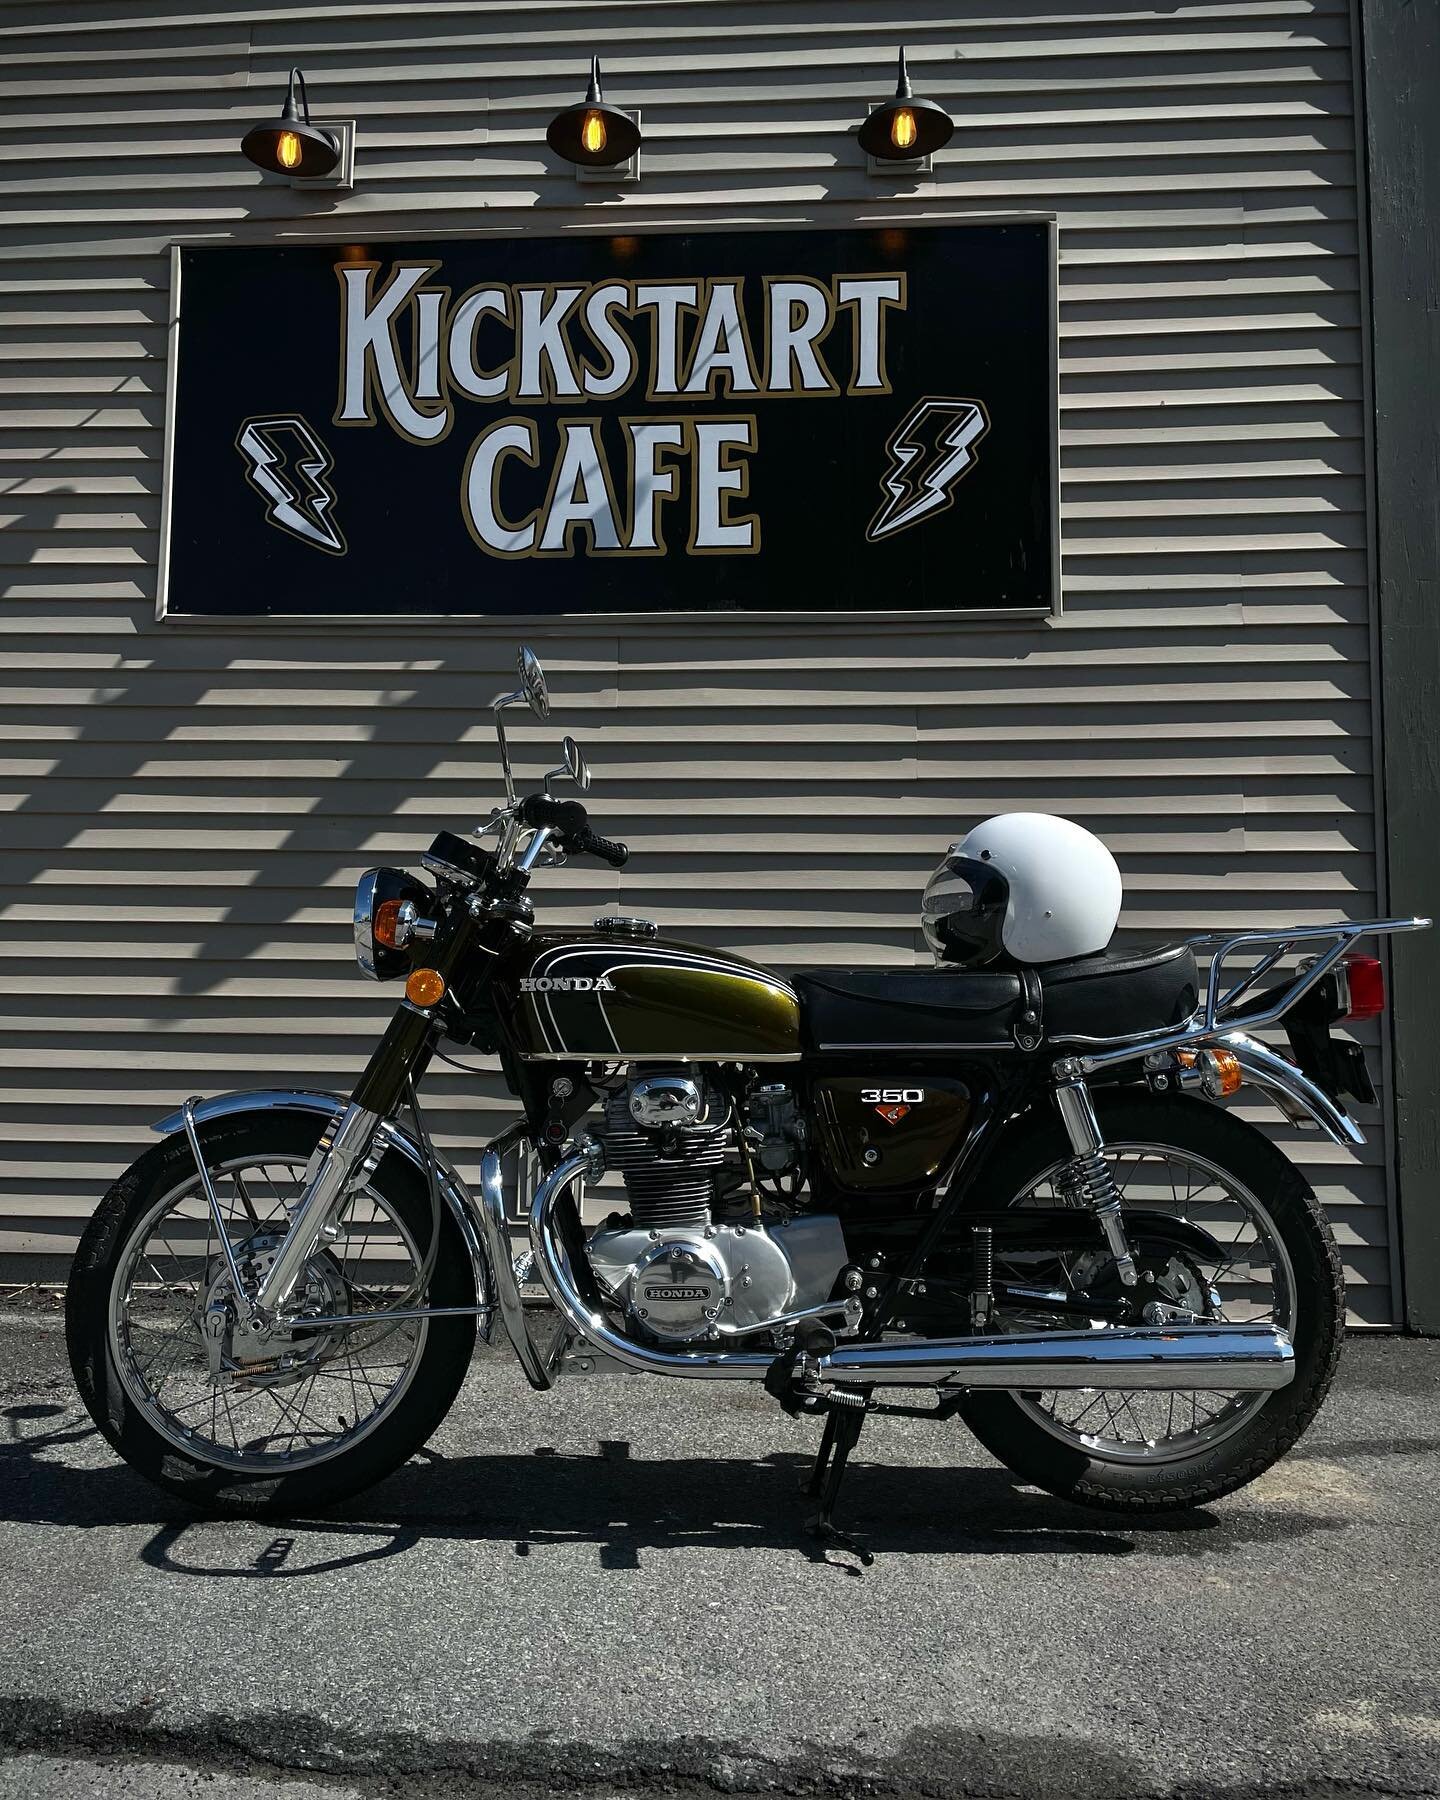 First bike to show up this spring! It&rsquo;s going to be a great season. 
&bull;
&bull;
&bull;

#coffeeride #motorcycles #coffeeandmotorcycles #schuylervilleny #moto #espresso #kickstartcoffee #vintage